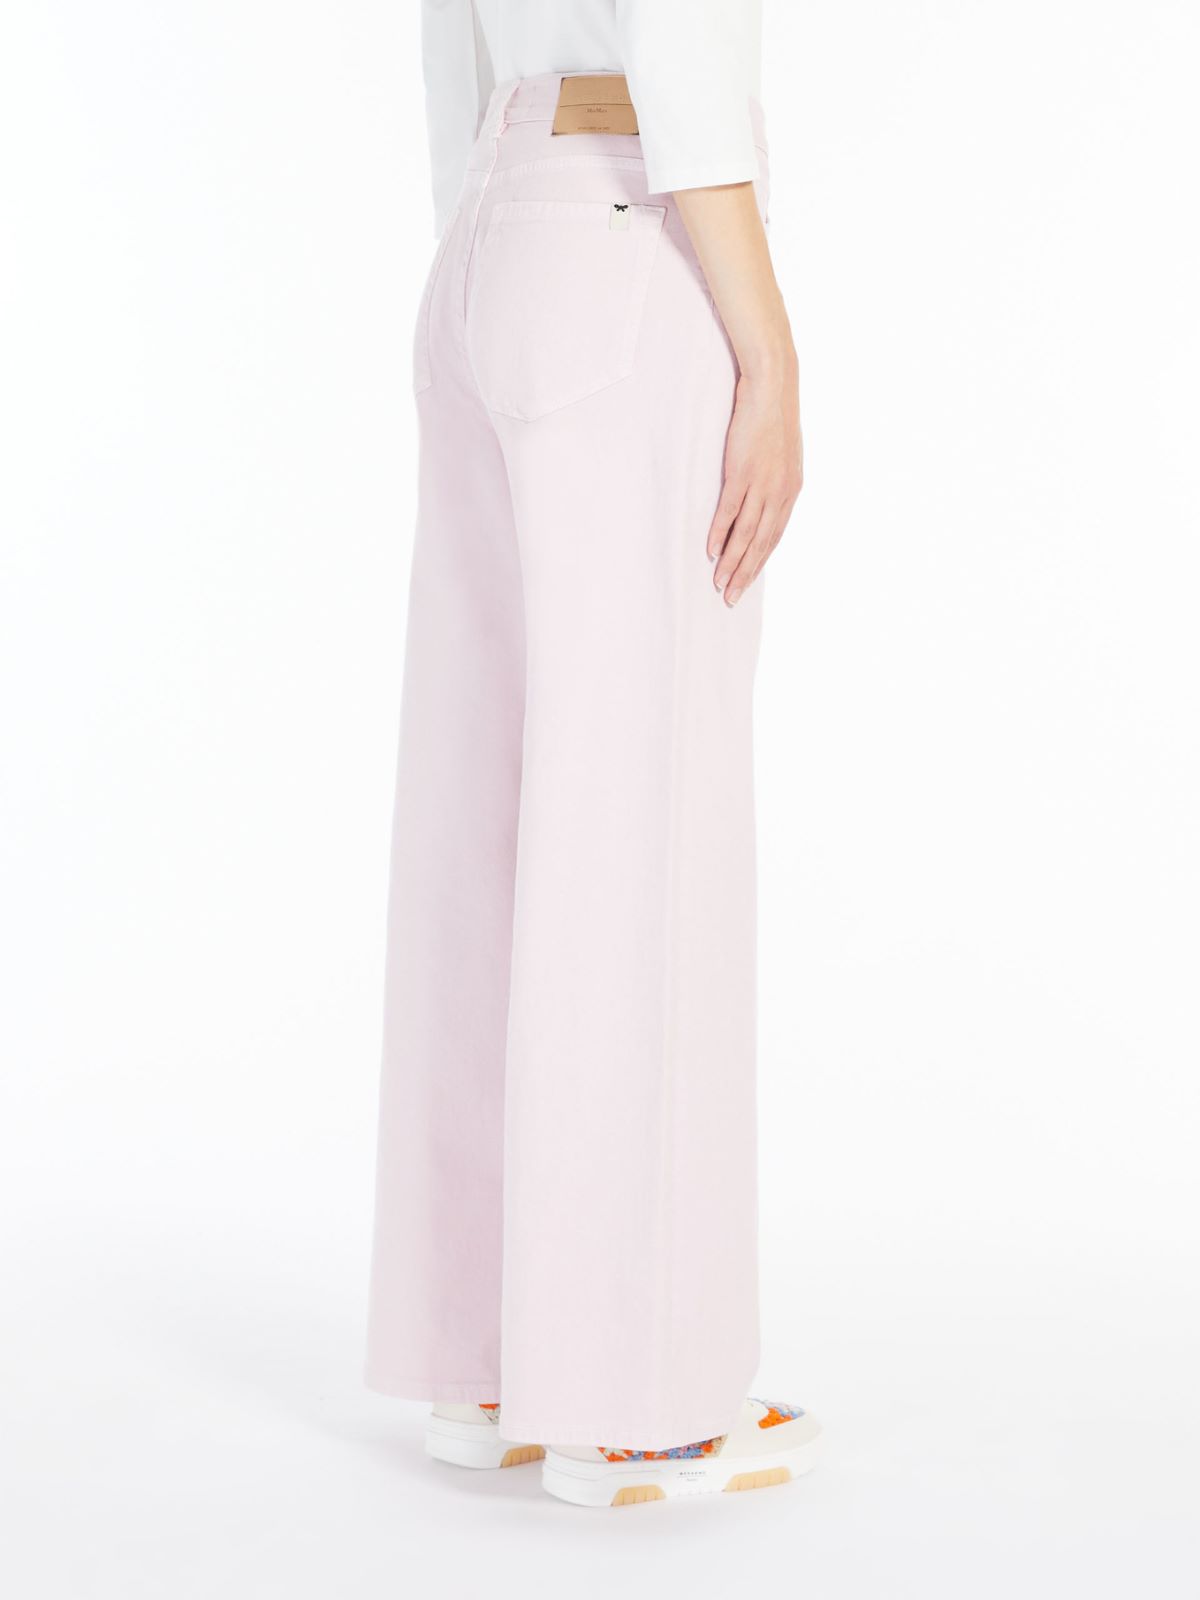 Stretch cotton trousers - PEONY - Weekend Max Mara - 3